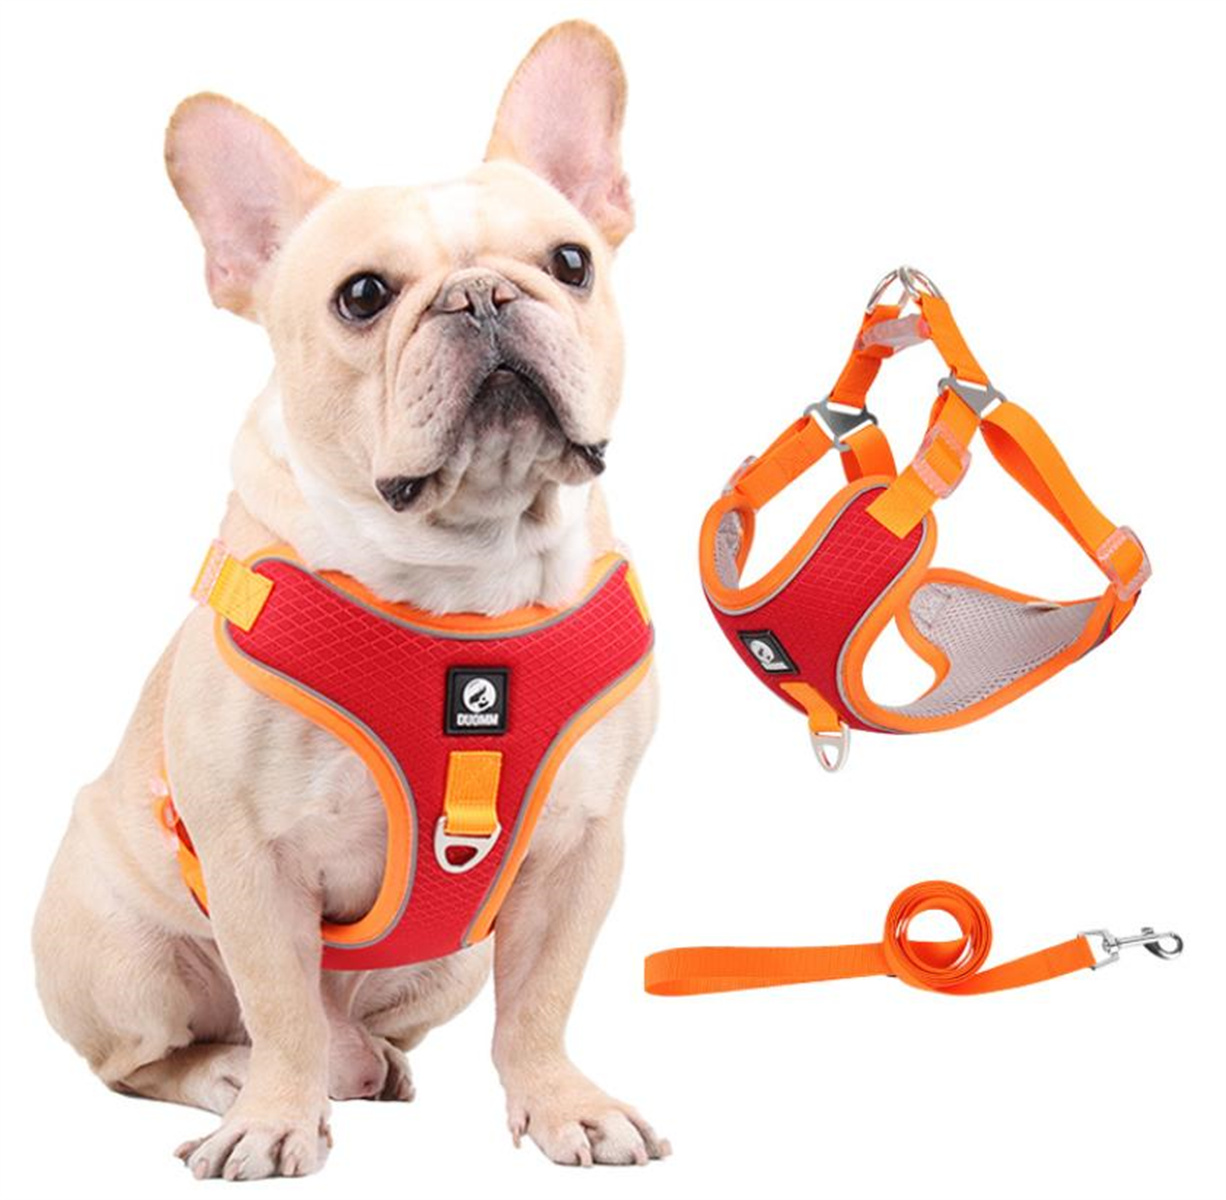 New pet chest strap vest type pet harnesses with leash mesh cloth reflective dog harness